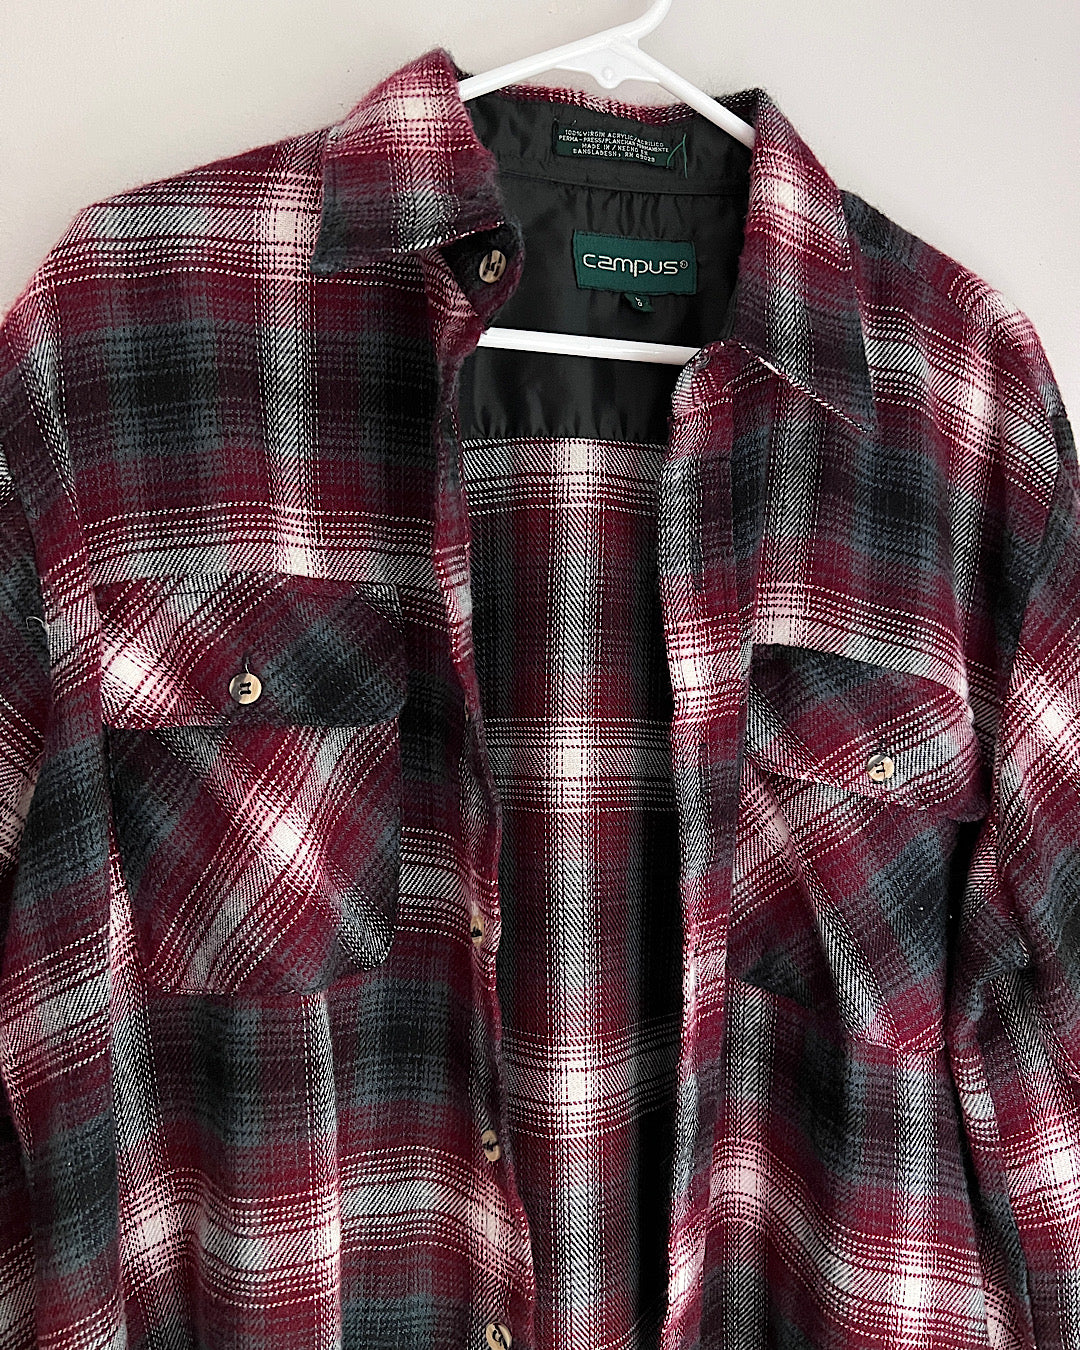 Vintage Maroon, Gray and White Plaid Button Up